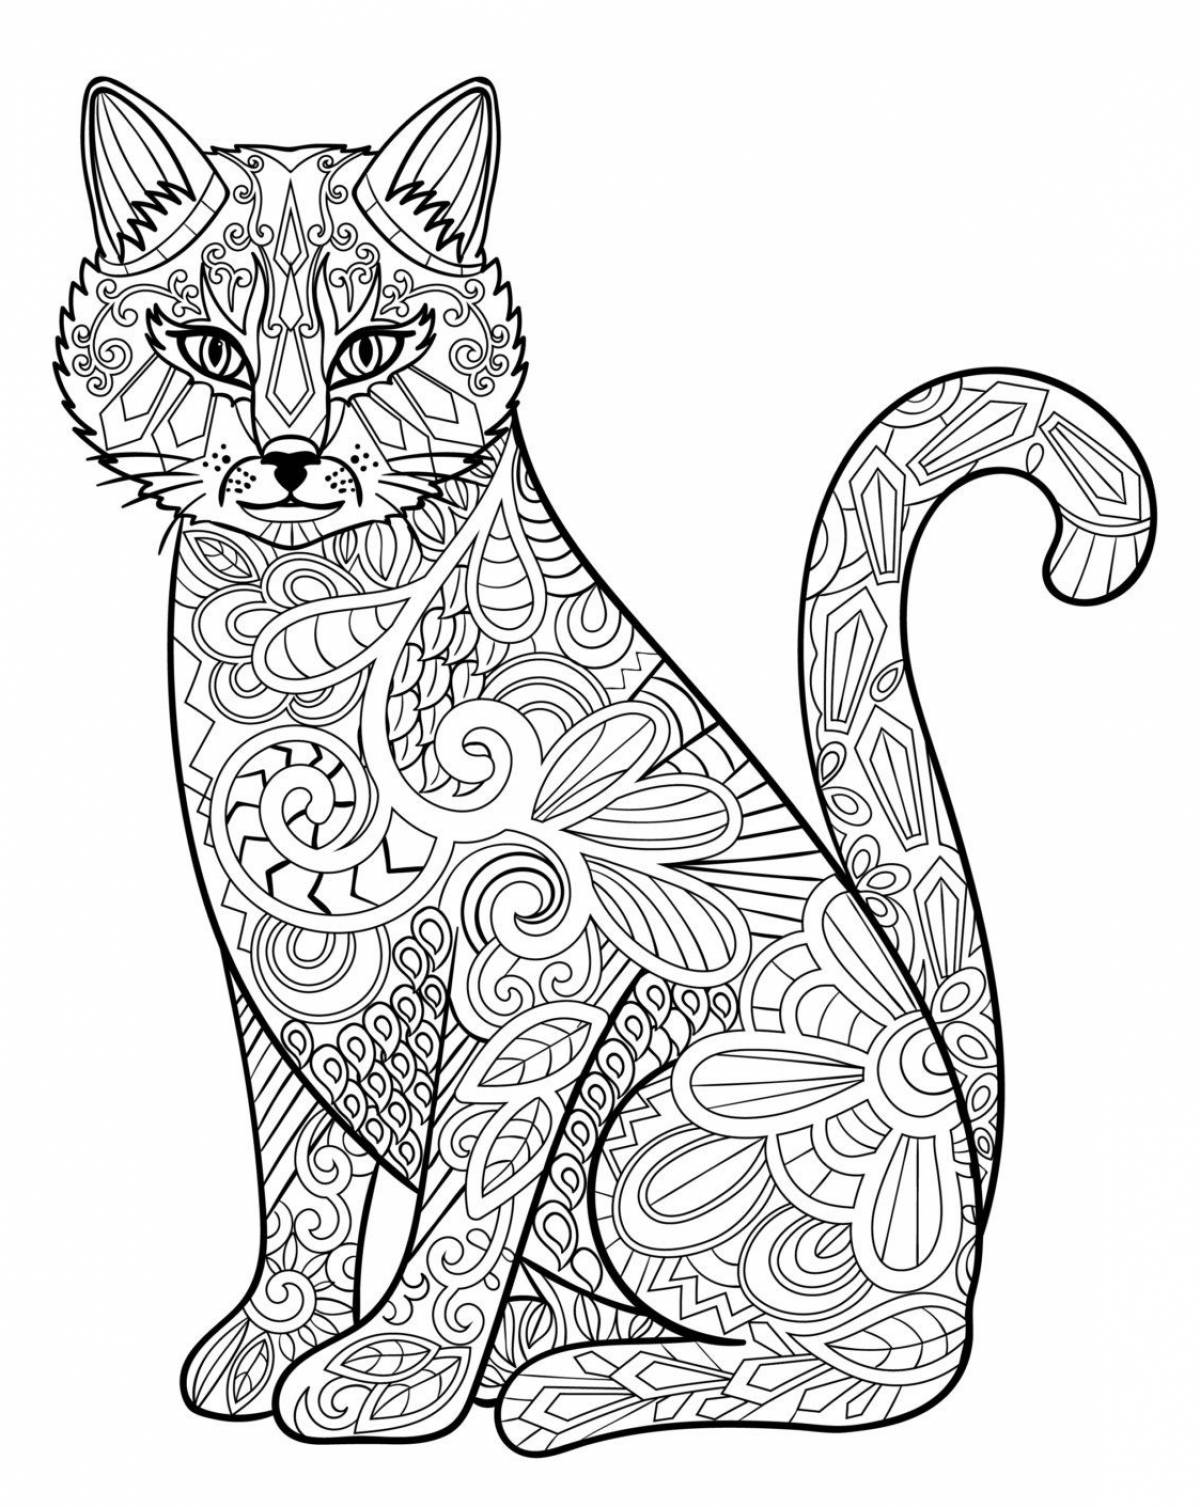 Patterned cat #2